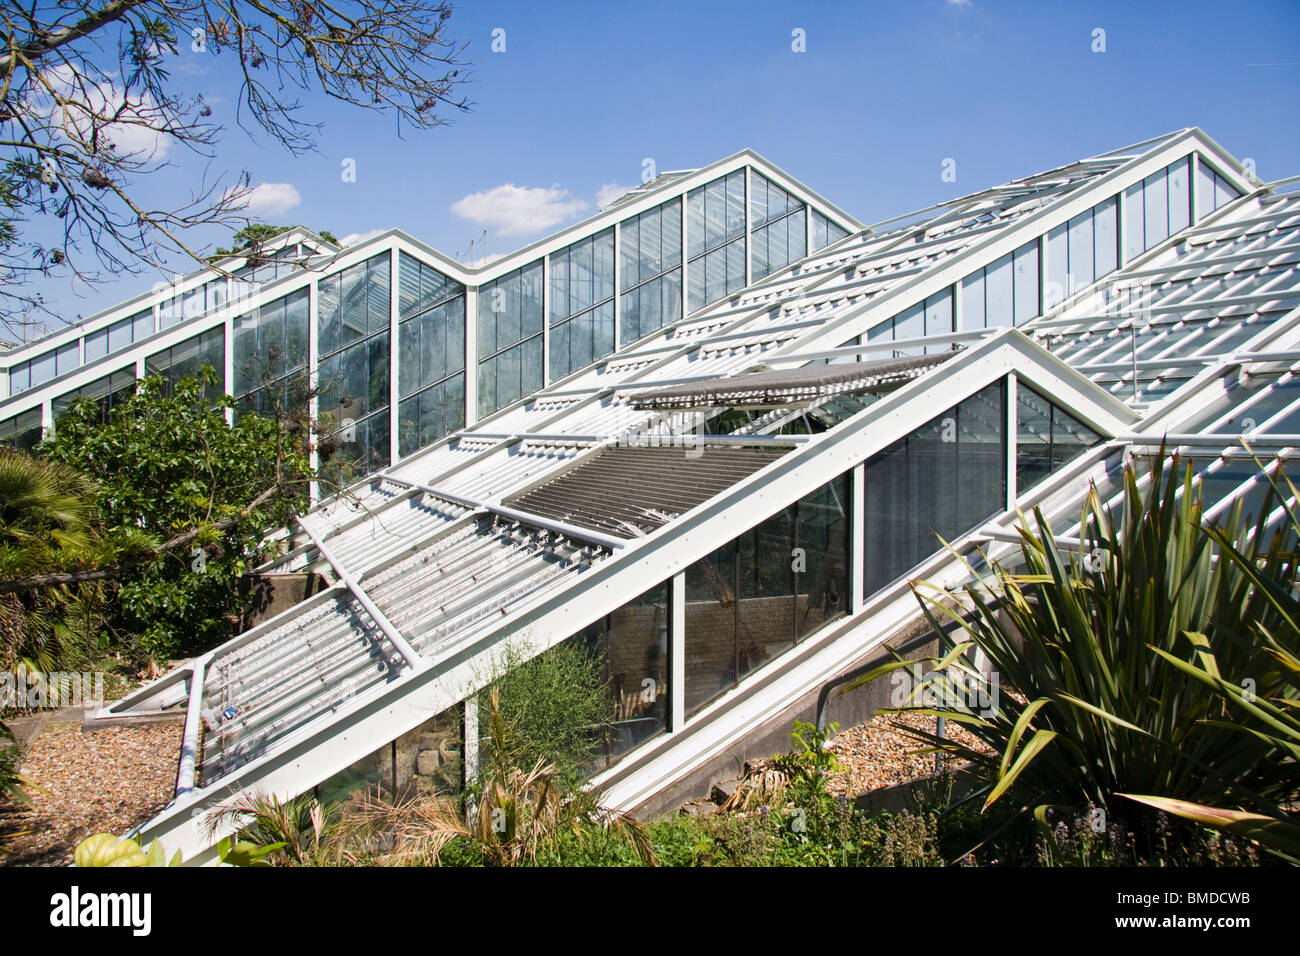 Princess of Wales conservatory Kew Gardens Londres Angleterre Banque D'Images